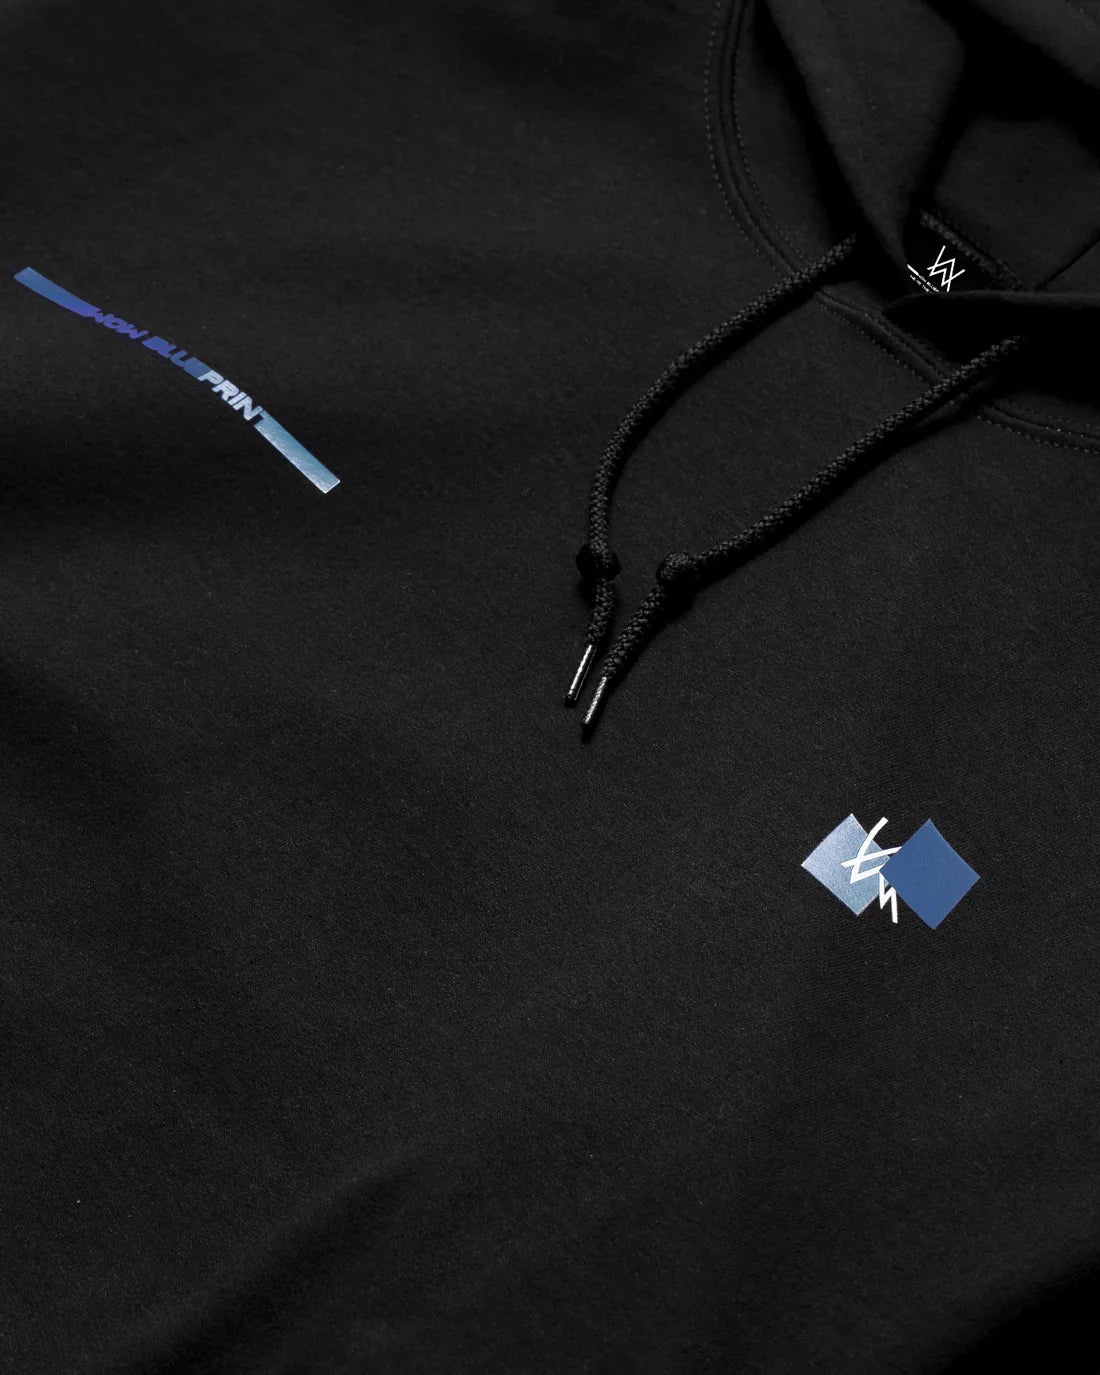 Close-up view of Alan Walker Blueprint Hoodie detailing with blue graphic text and logo on black fabric, showcasing quality stitching and hood drawstrings.